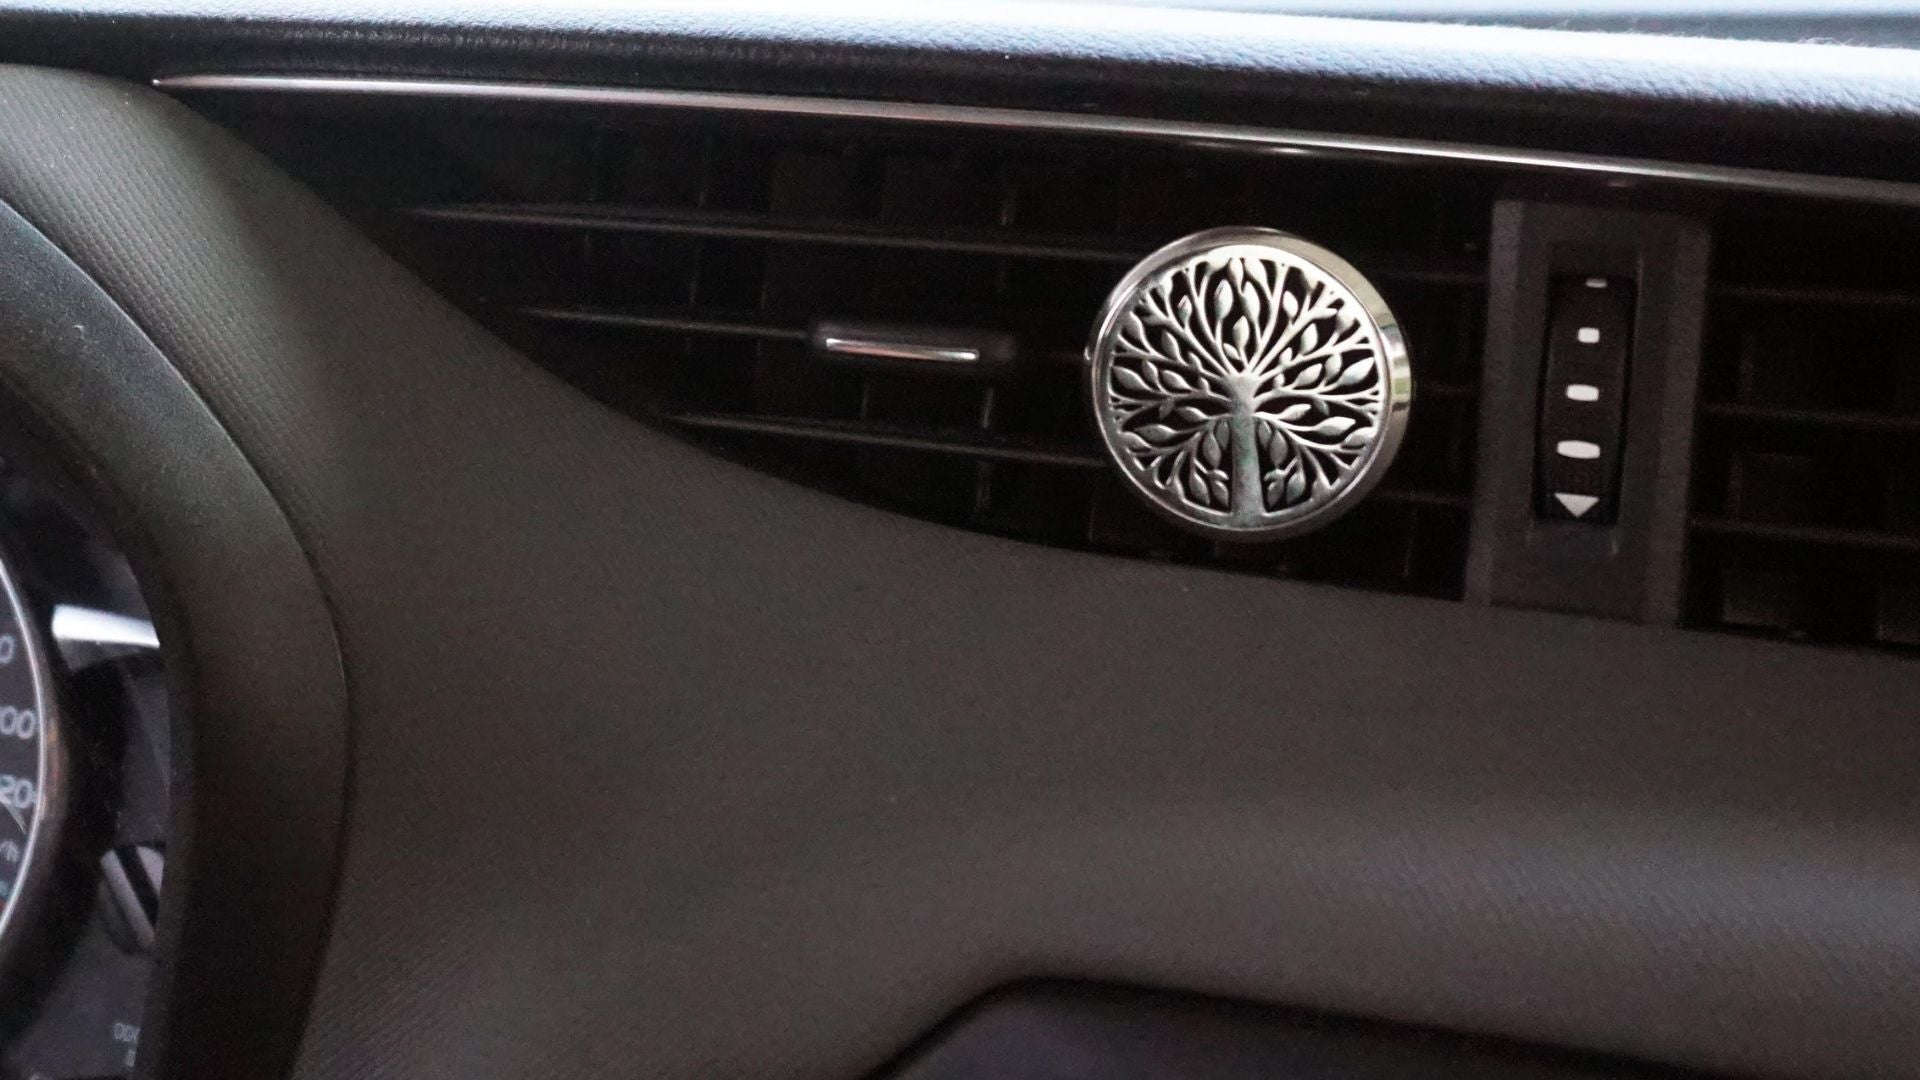 Scented Car Diffuser - Clip On Vent - Essential Oil Reed Diffuser